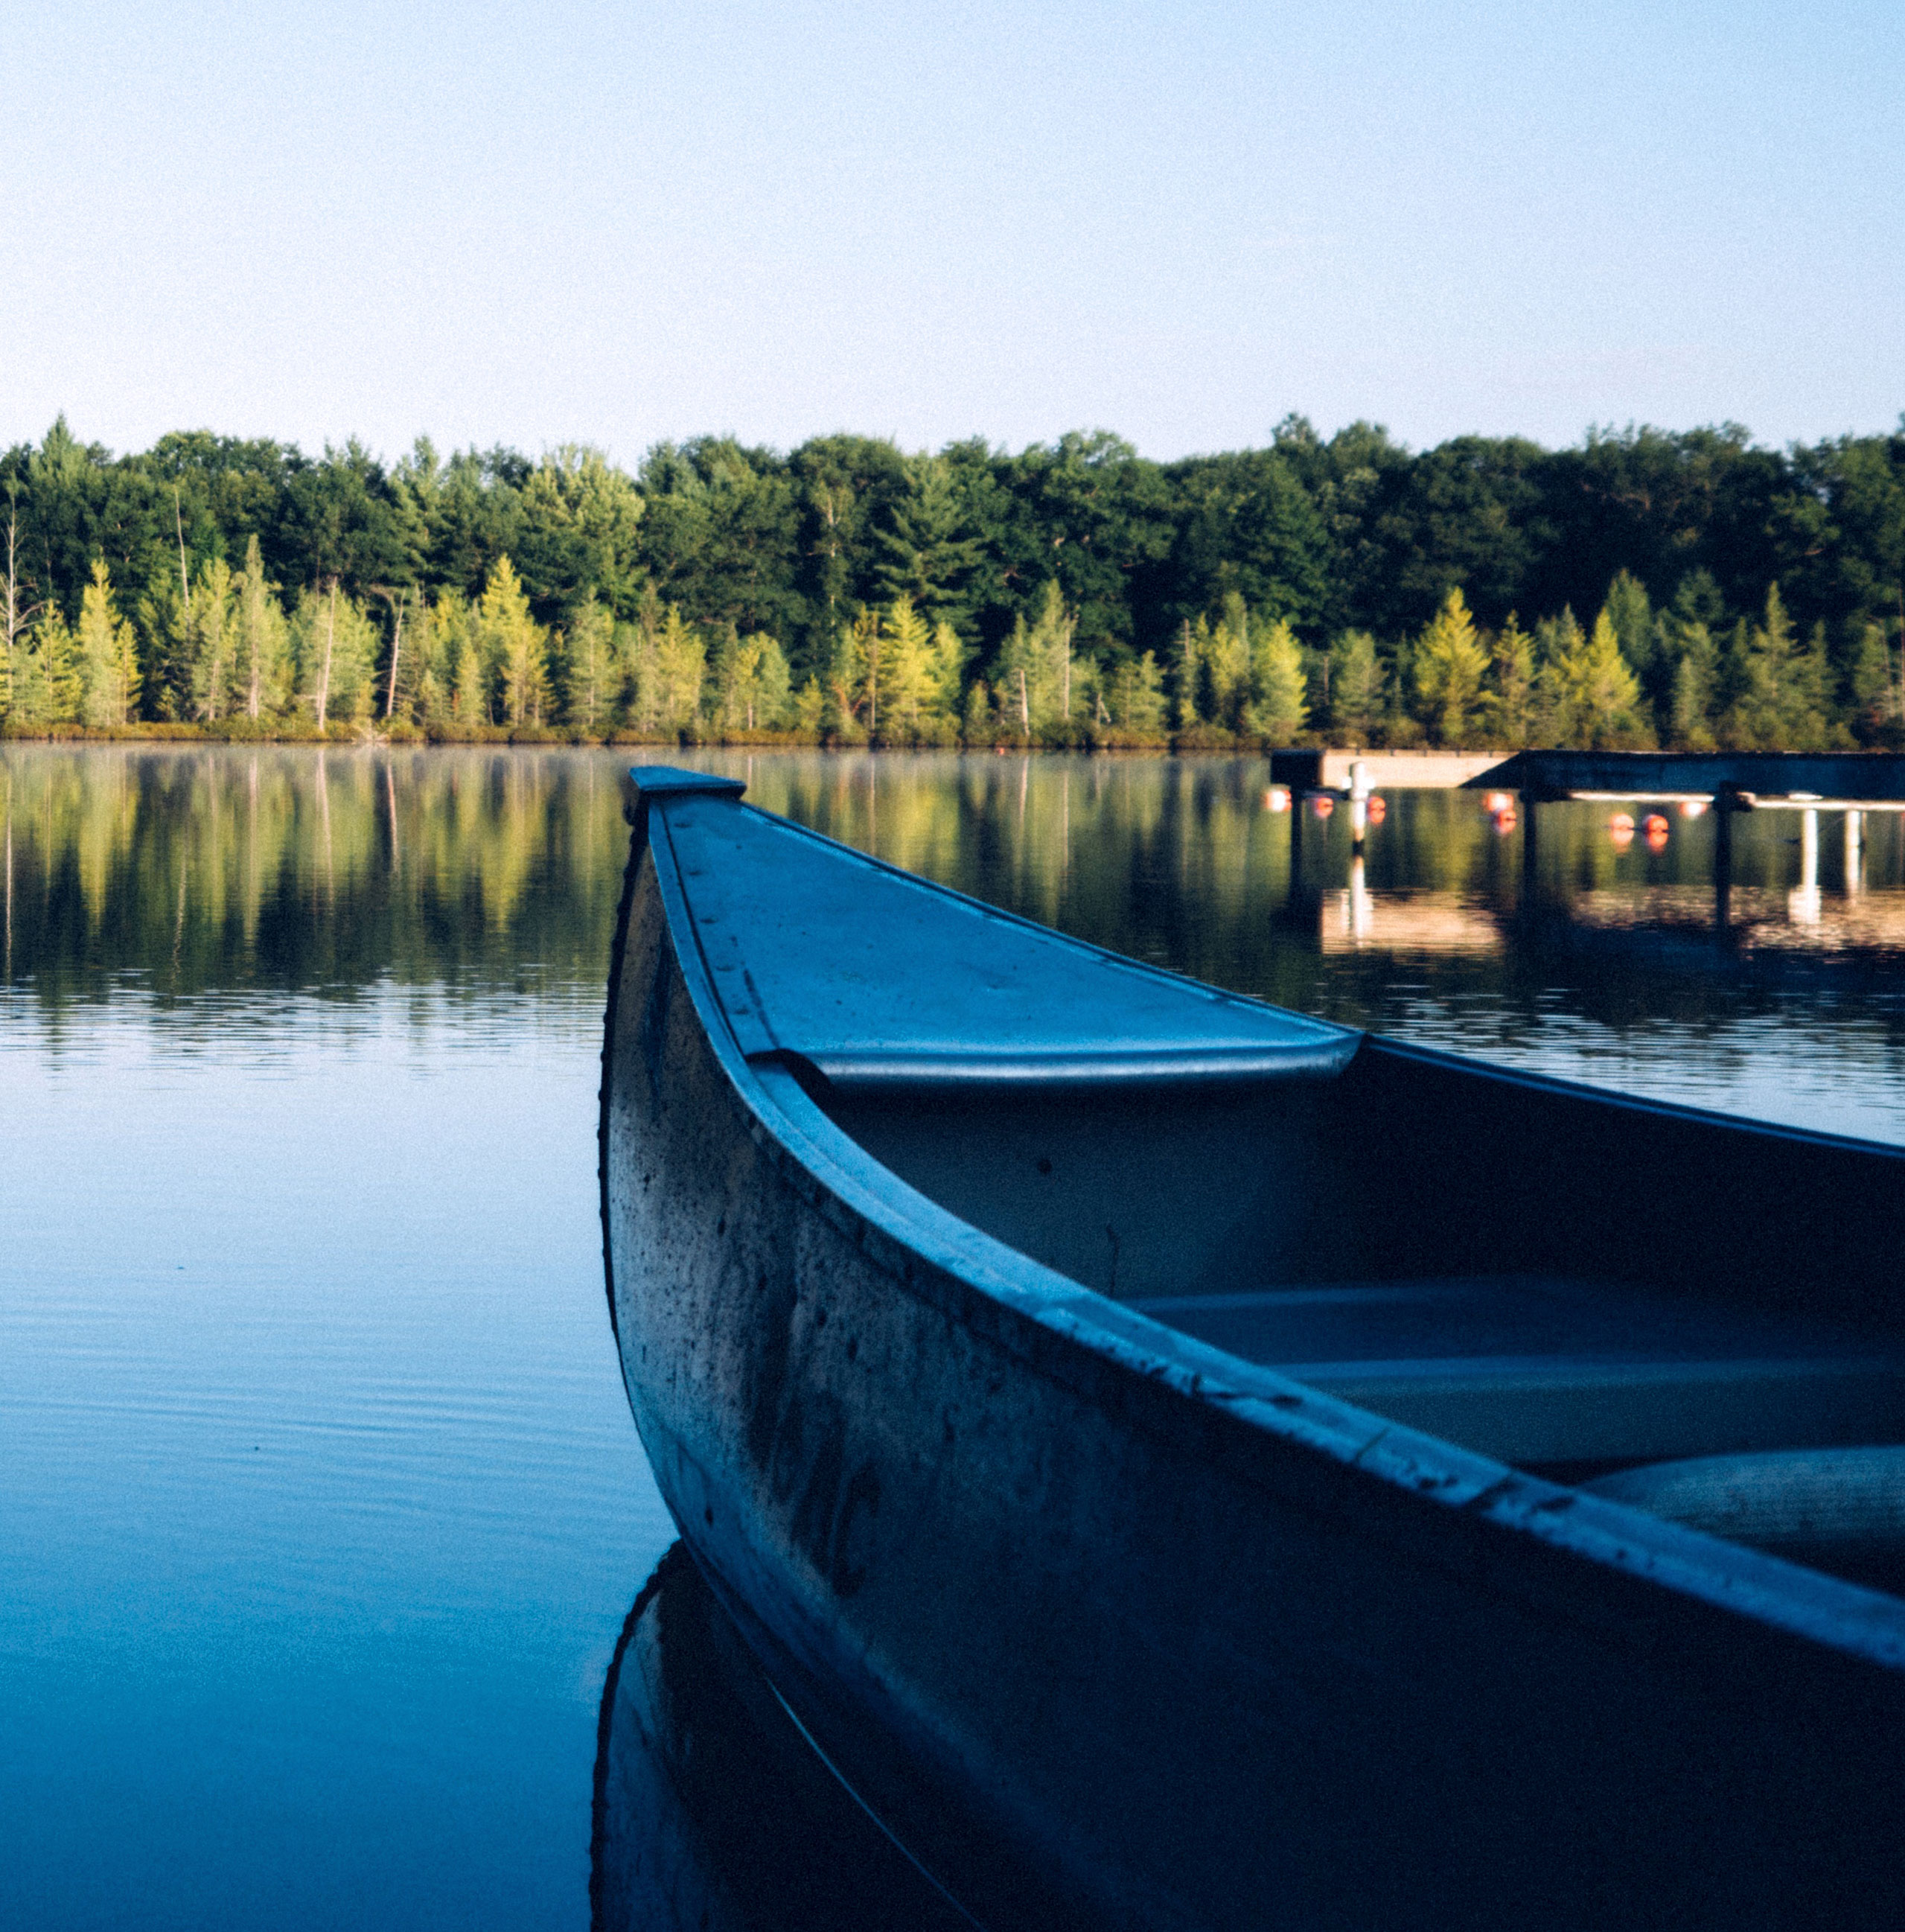 Canoe floating in a lake near a wooded area